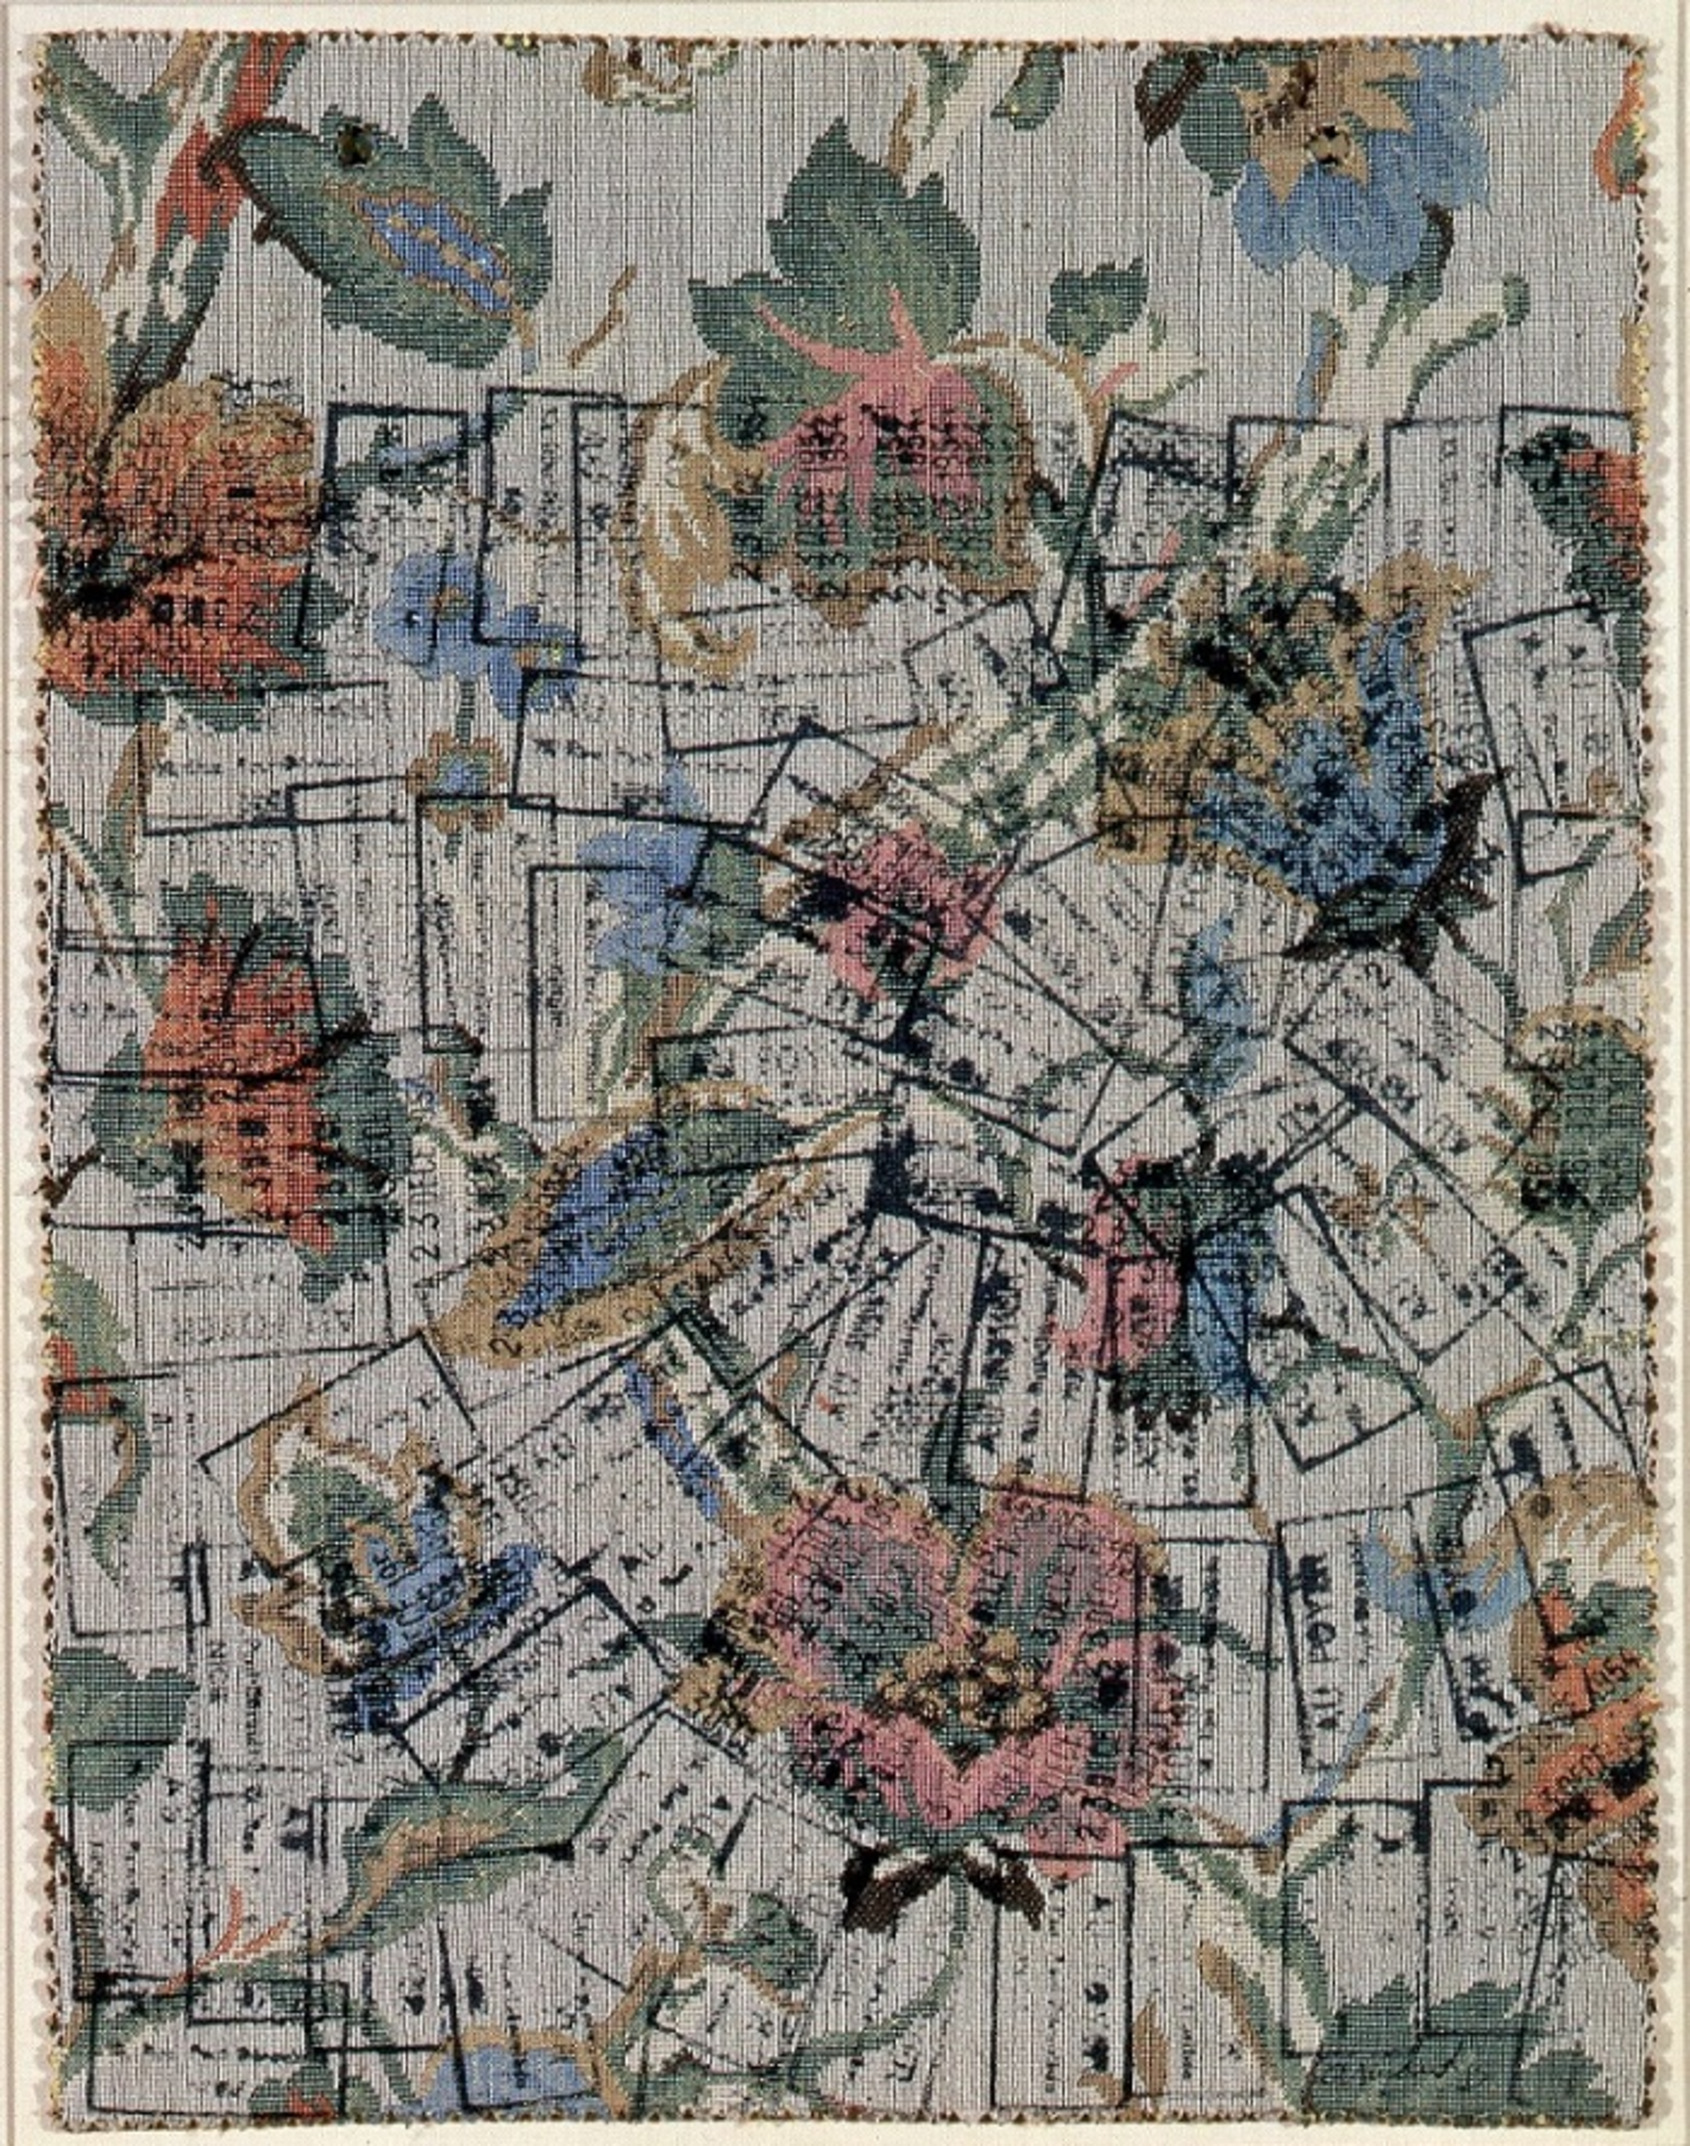  Cachet 54, Arman, 1954, 36.8x29cm. Stamp impressions in ink on fabric. Courtesy of The Arman Marital Trust. 